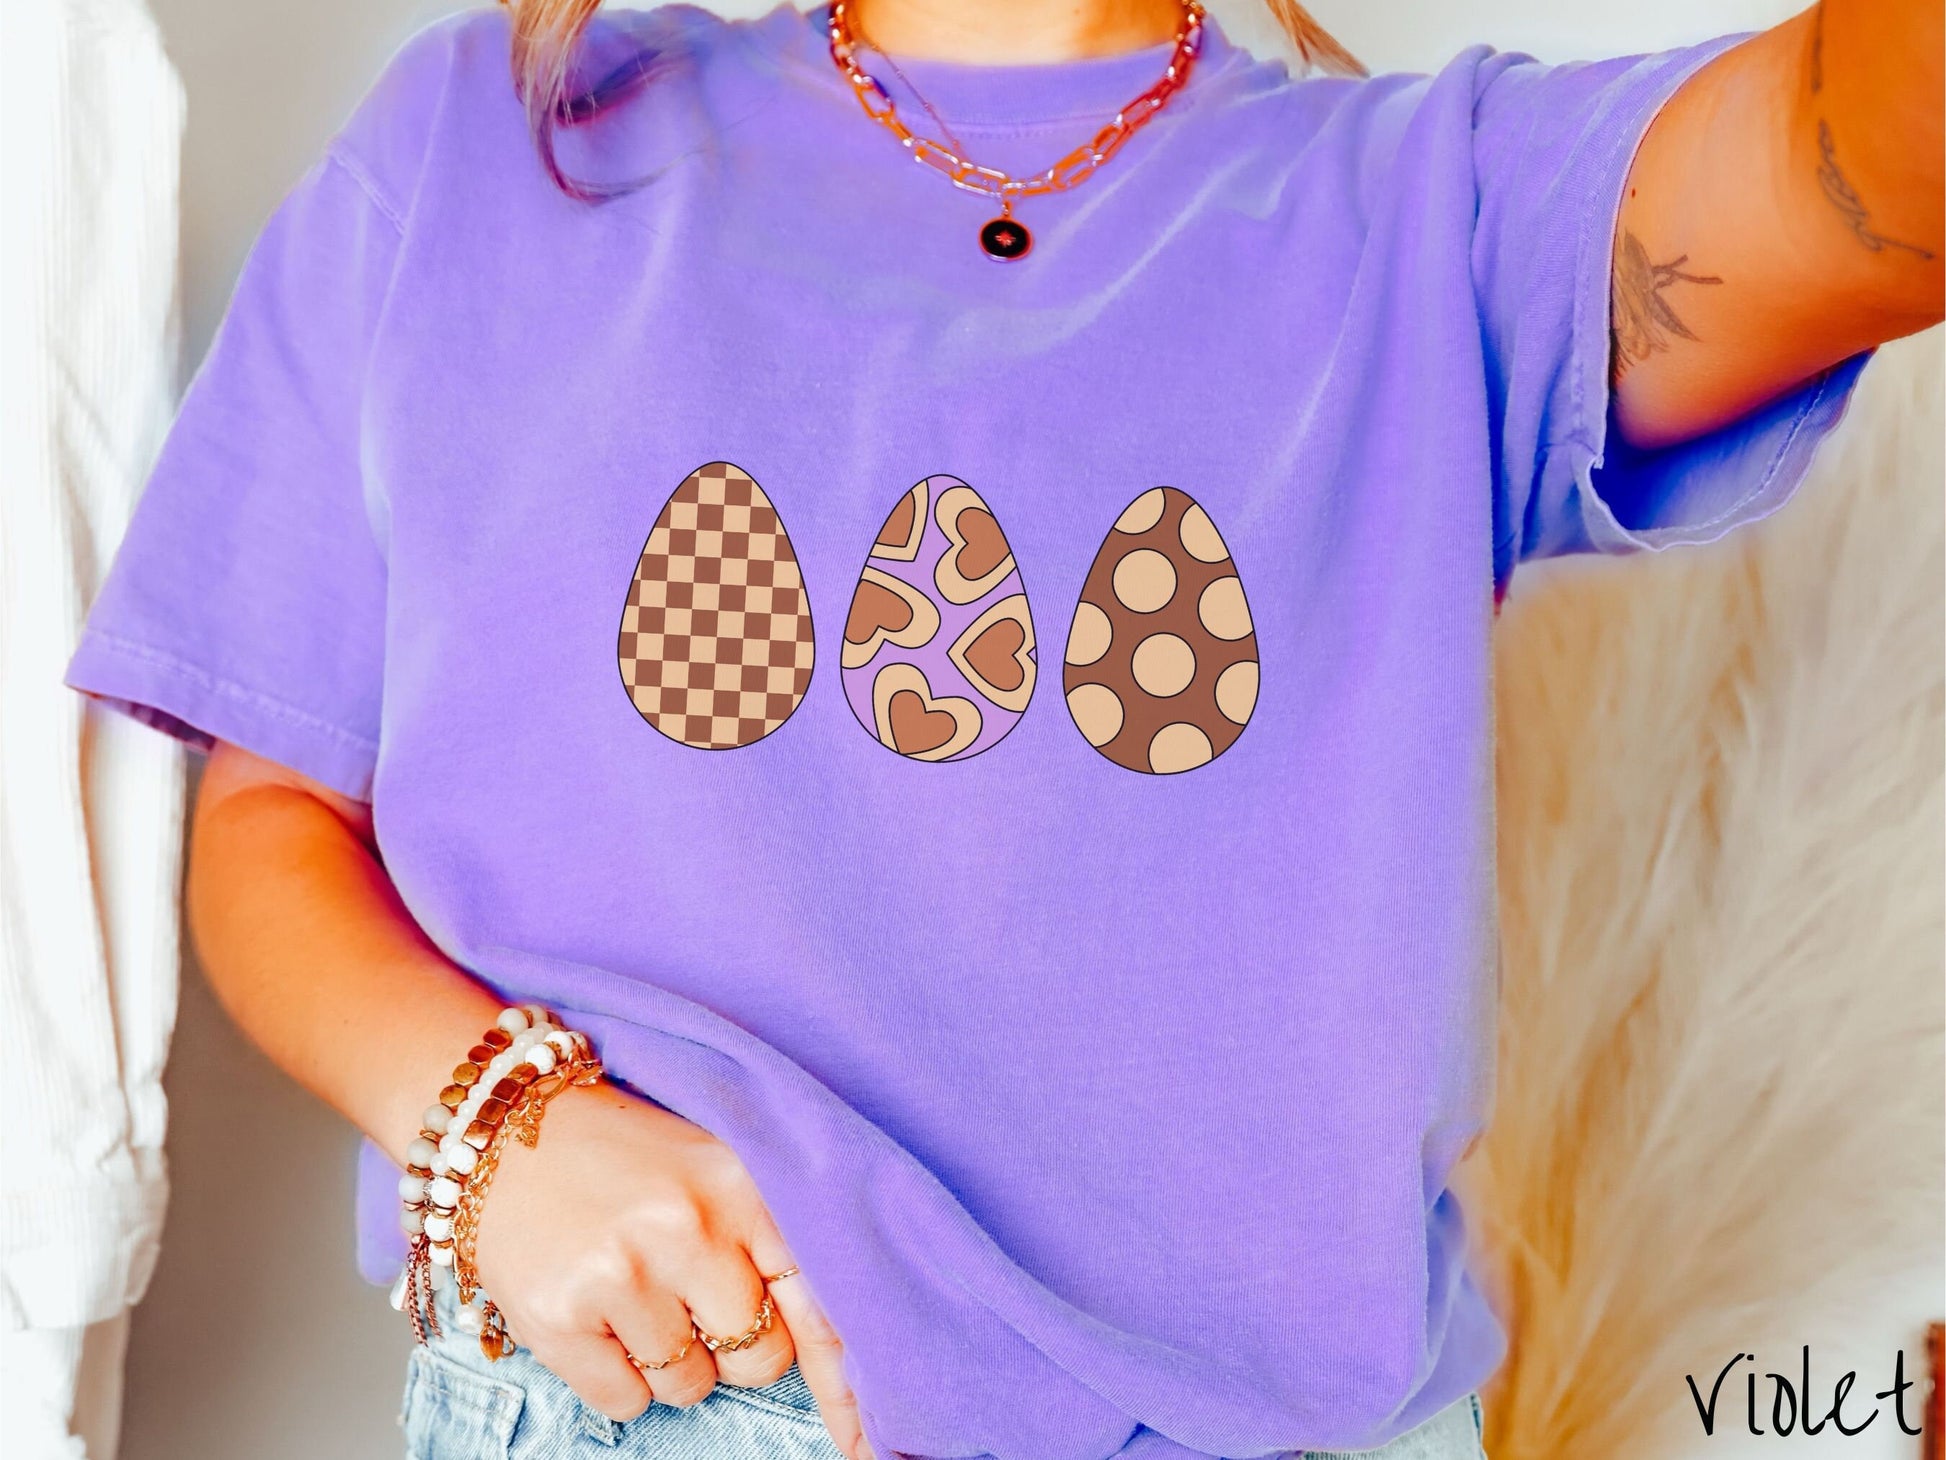 A woman wearing a cute, vintage violet colored shirt with three Easter eggs. The left egg has a light yellow and brown checkerboard pattern, the middle is purple with light yellow brown hearts, and the right is brown with light yellow circles.